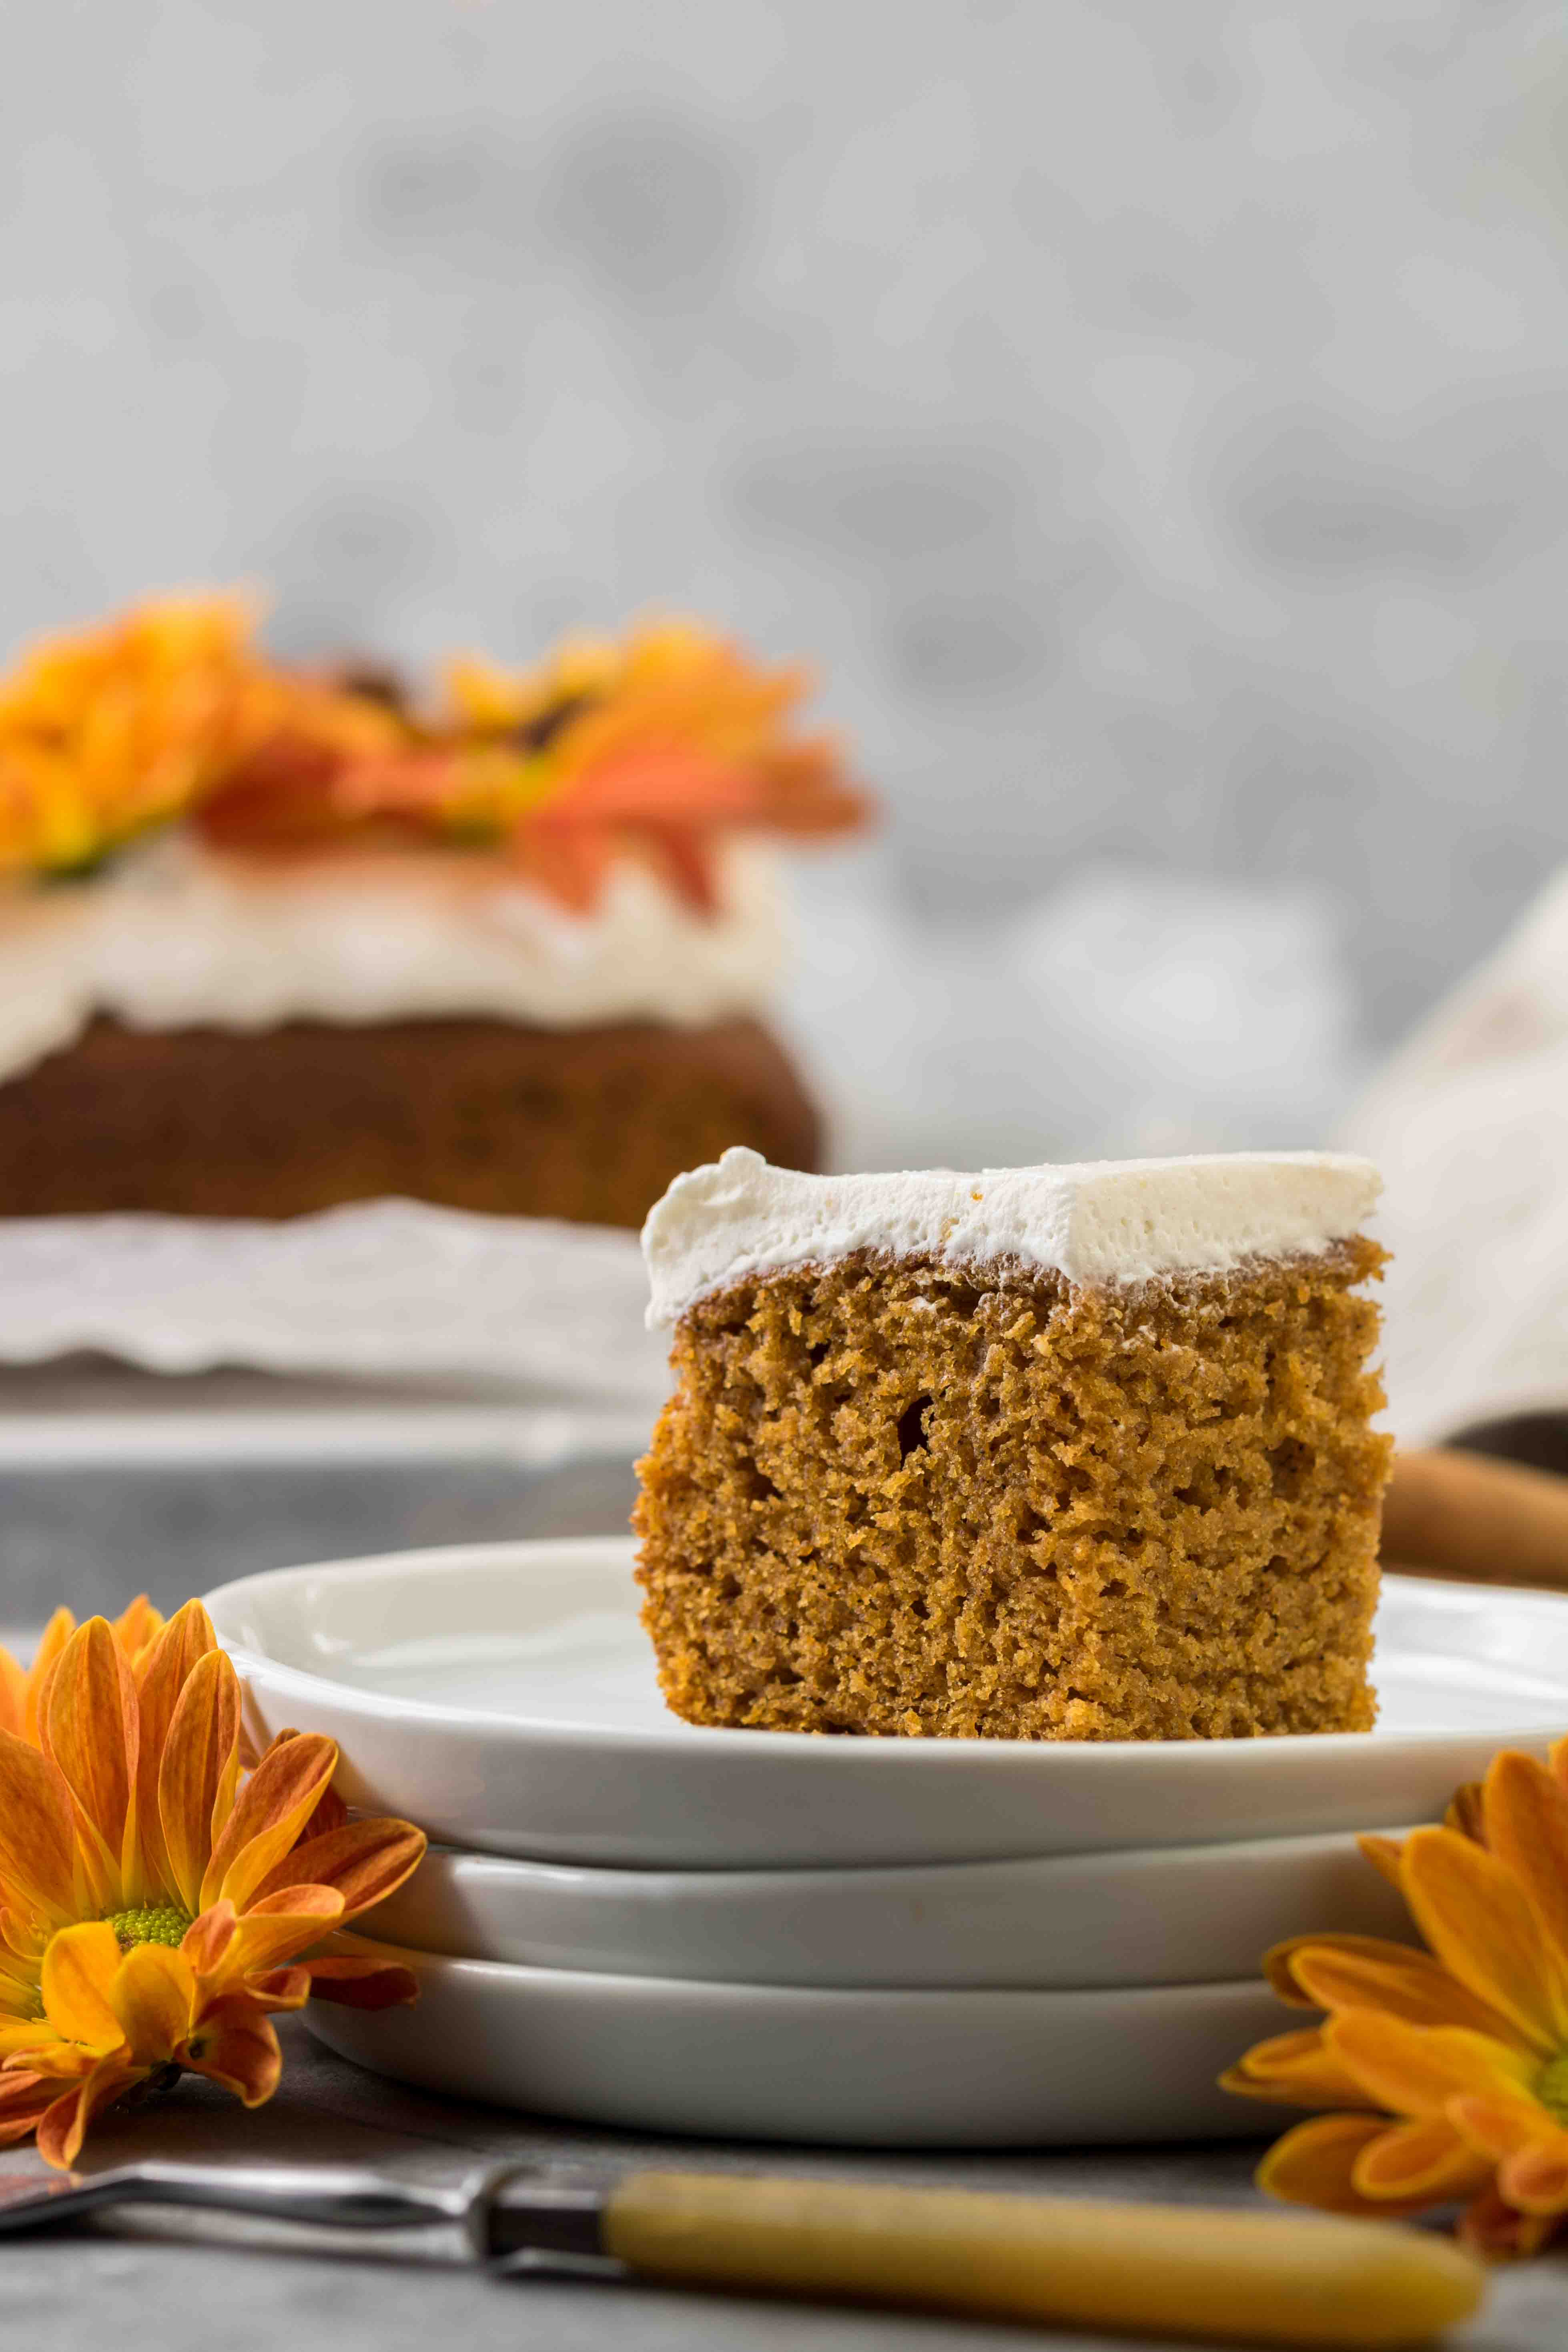 How to decorate pumpkin cake